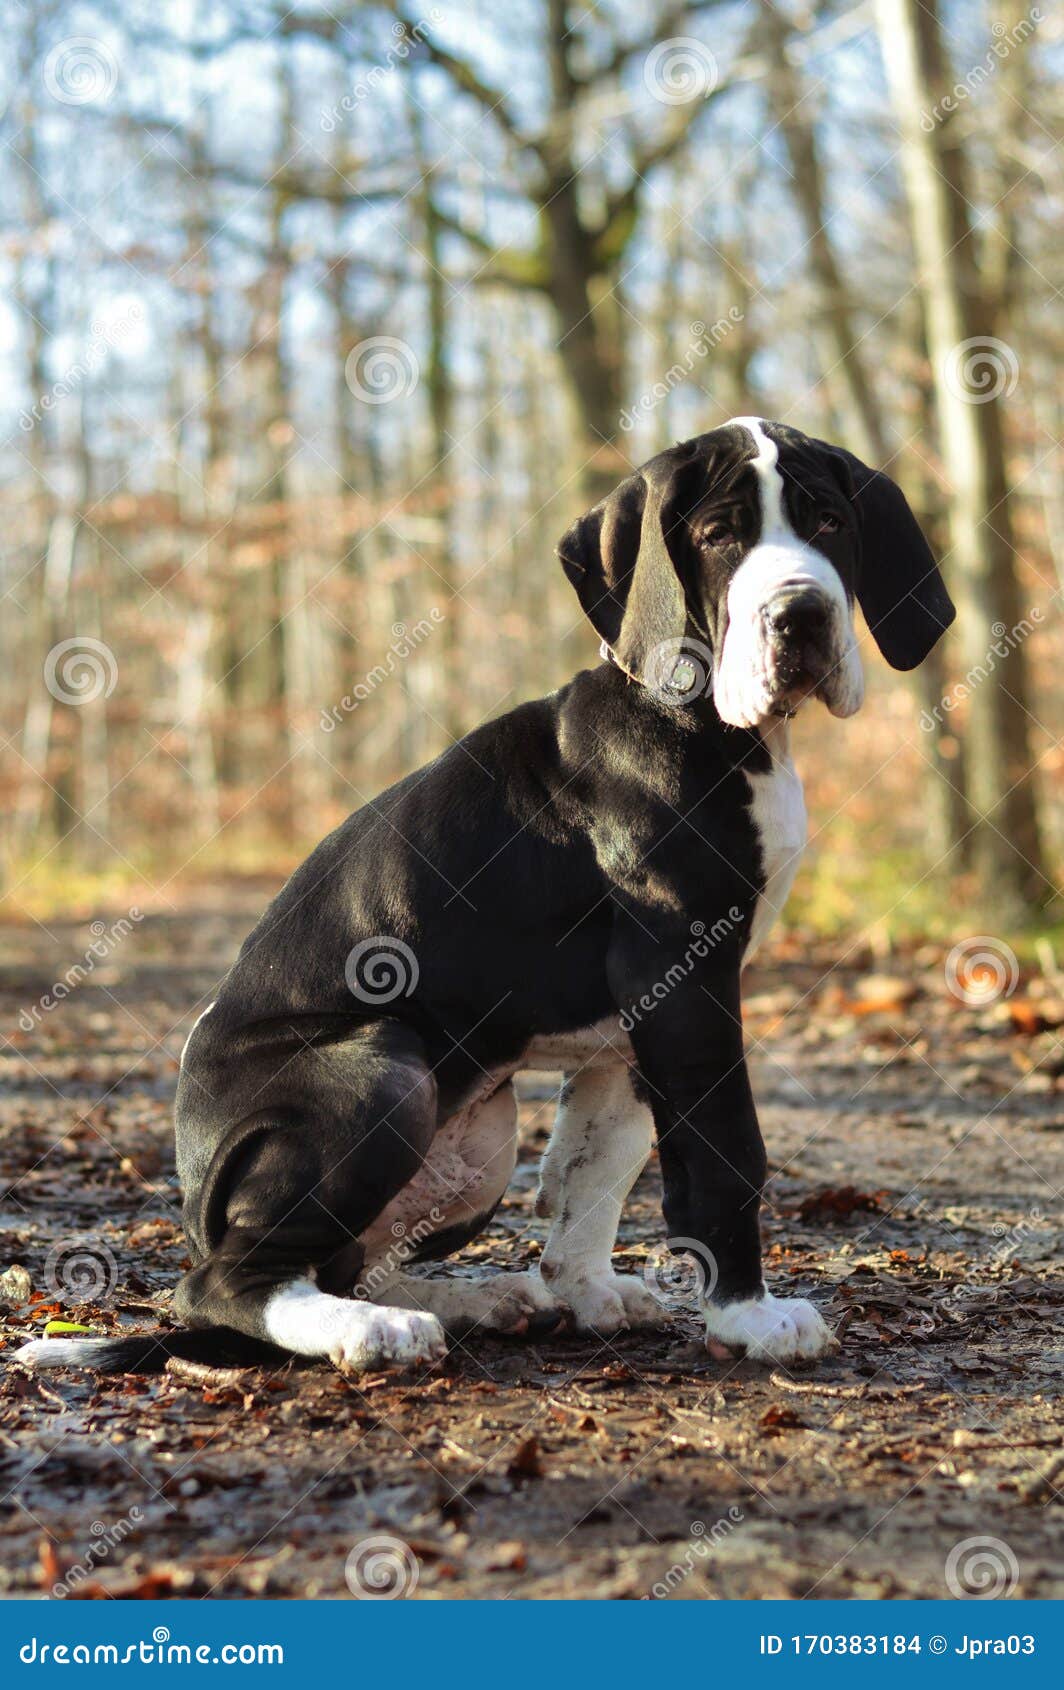 Cute Great Dane puppy stock photo. Image of doggy, cute